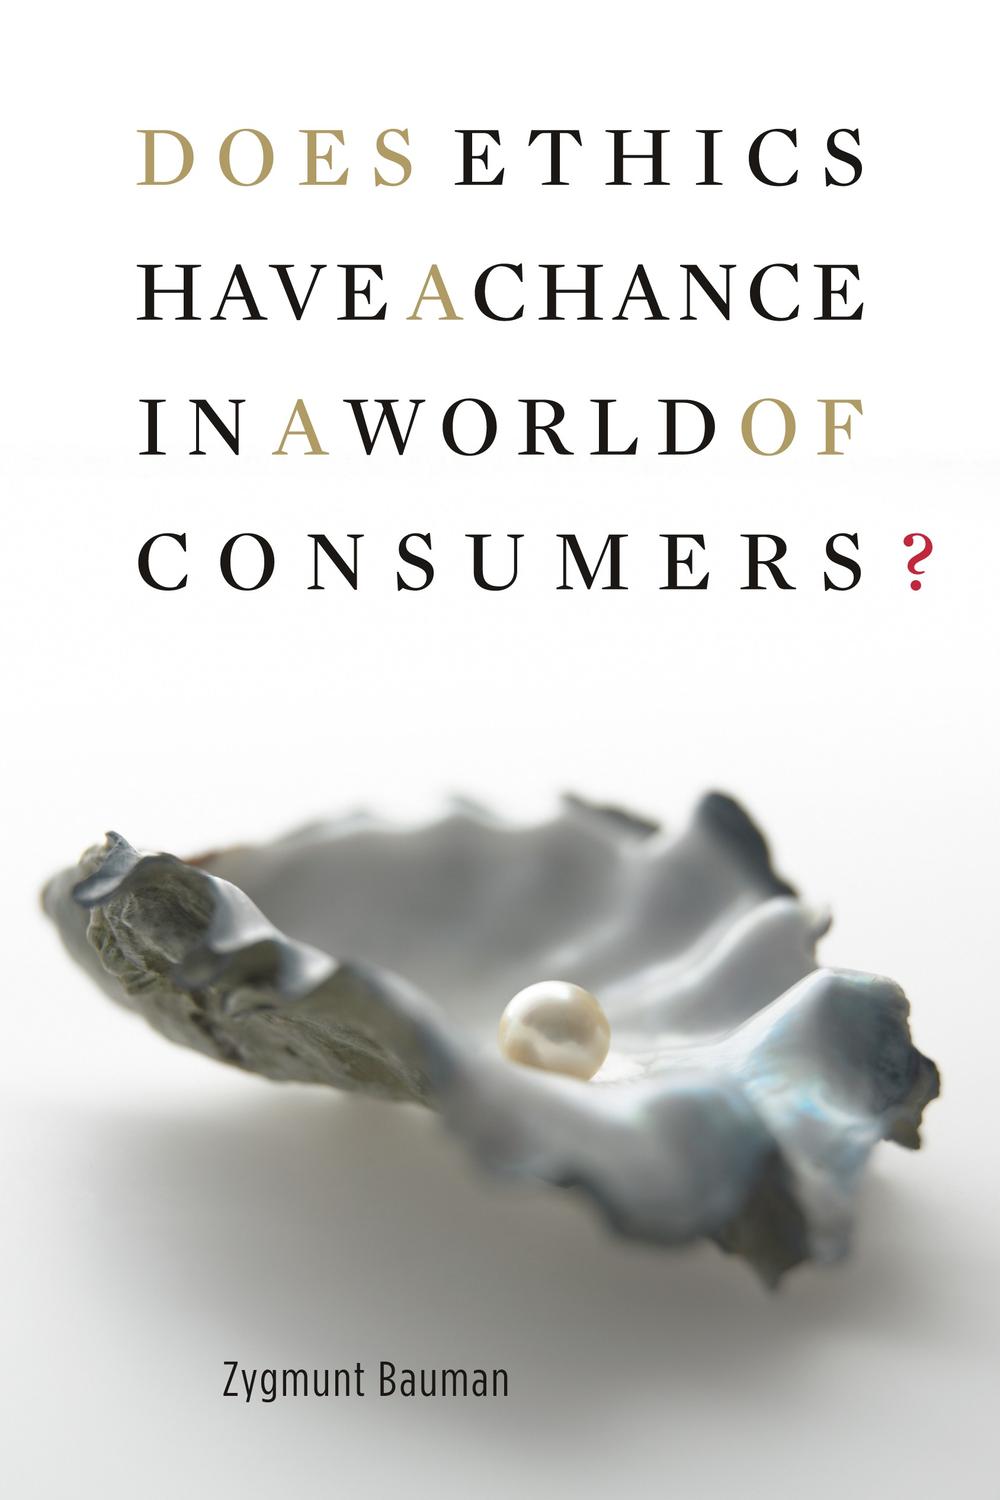 Does Ethics Have a Chance in a World of Consumers? - Zygmunt Bauman